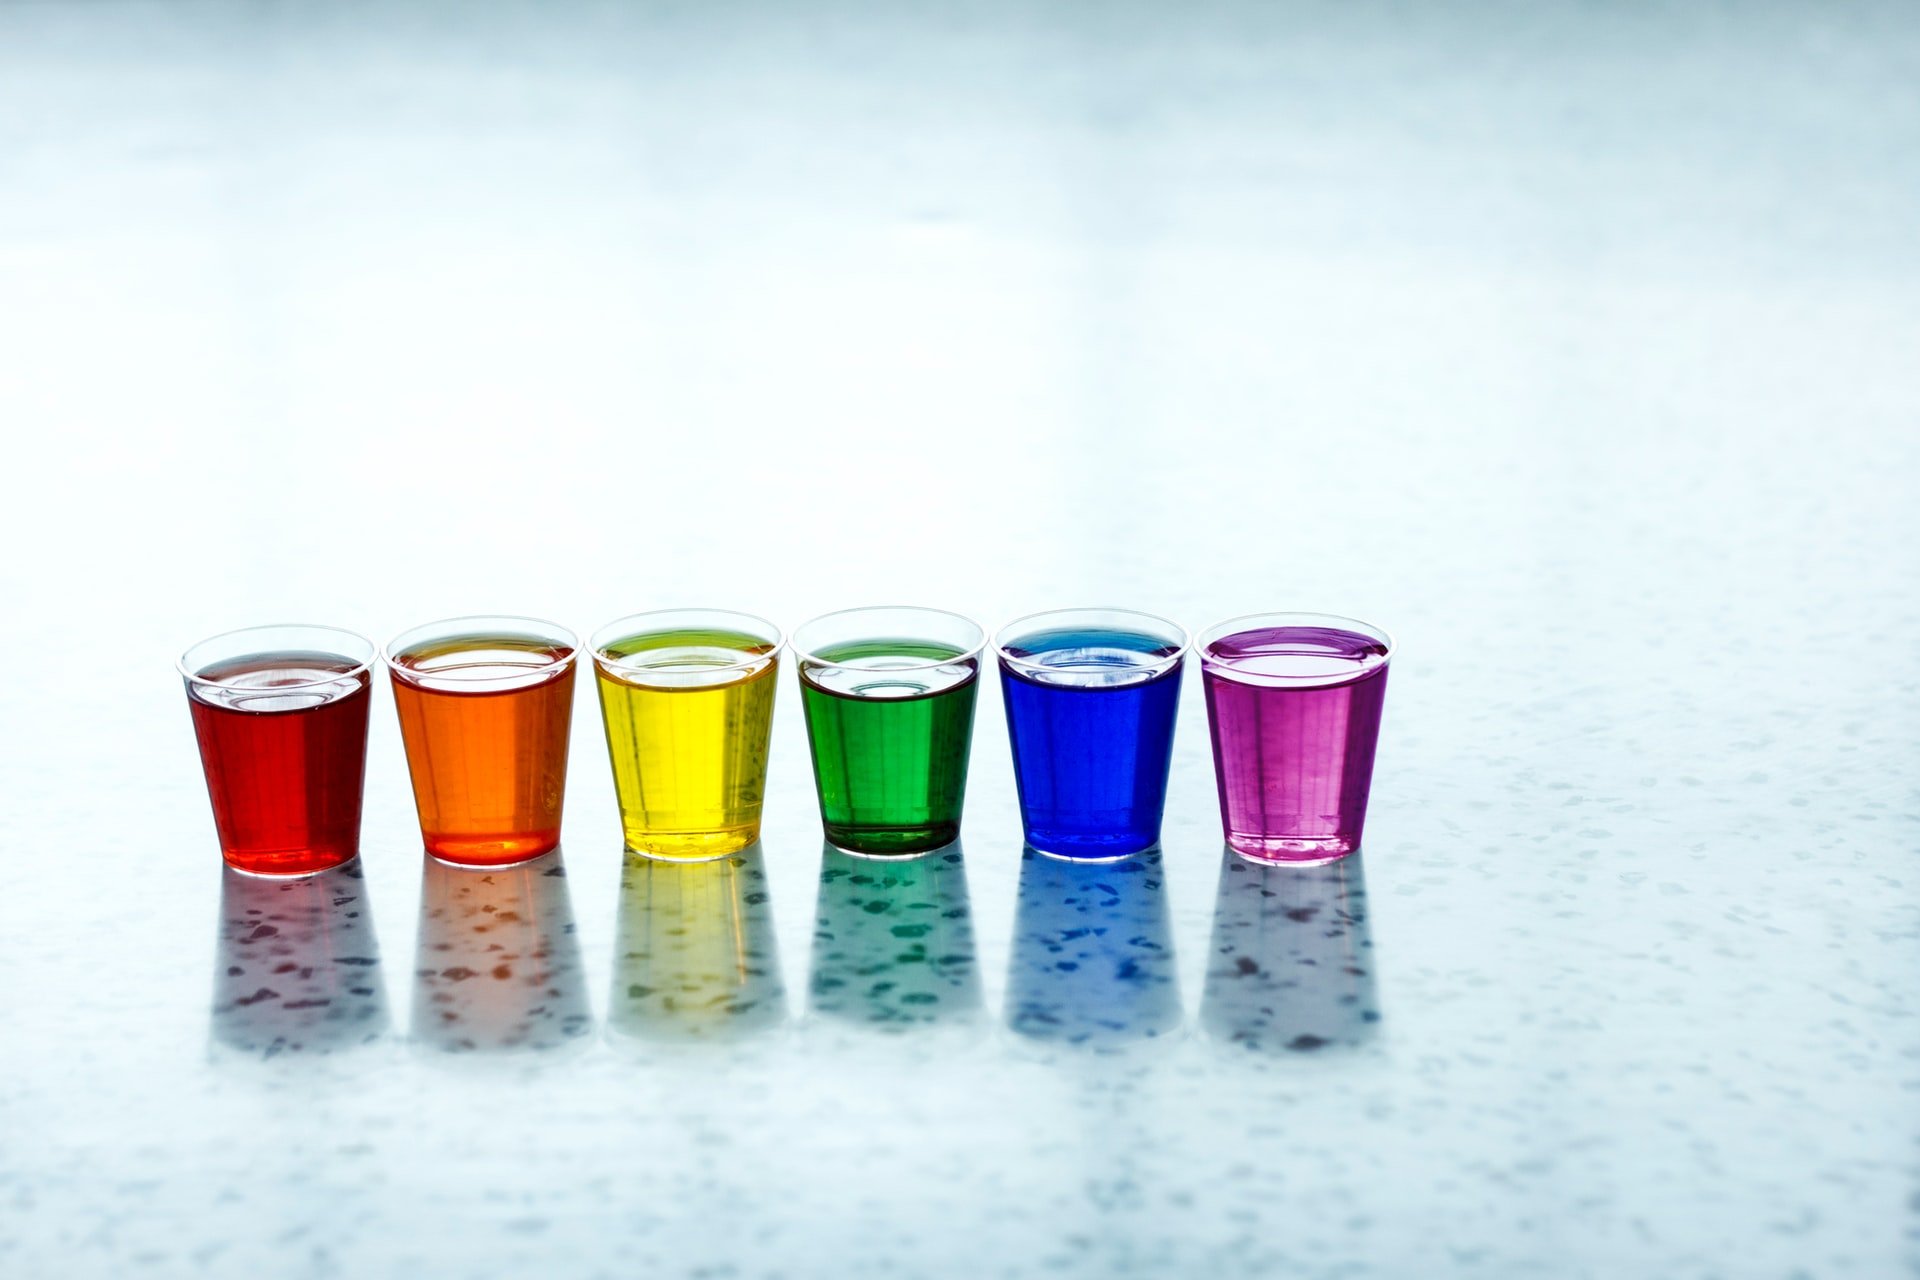 Rainbow colored vodka jello shots lined up in a row.